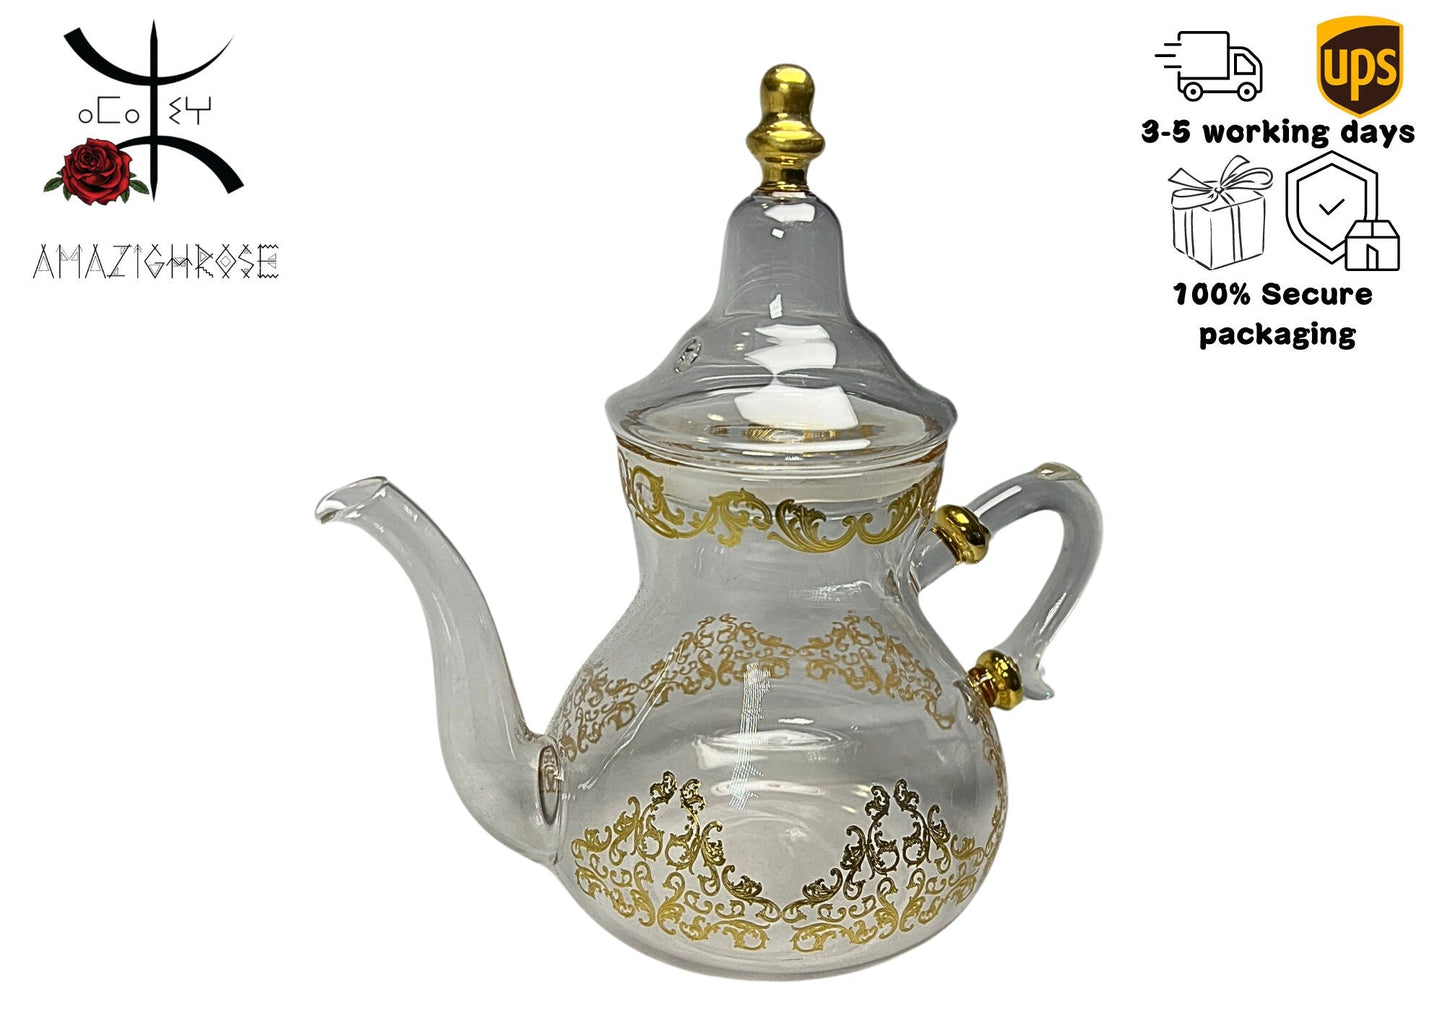 Amazighrose handmade large Glass Teapot with golden or Silver details - Amazighrose